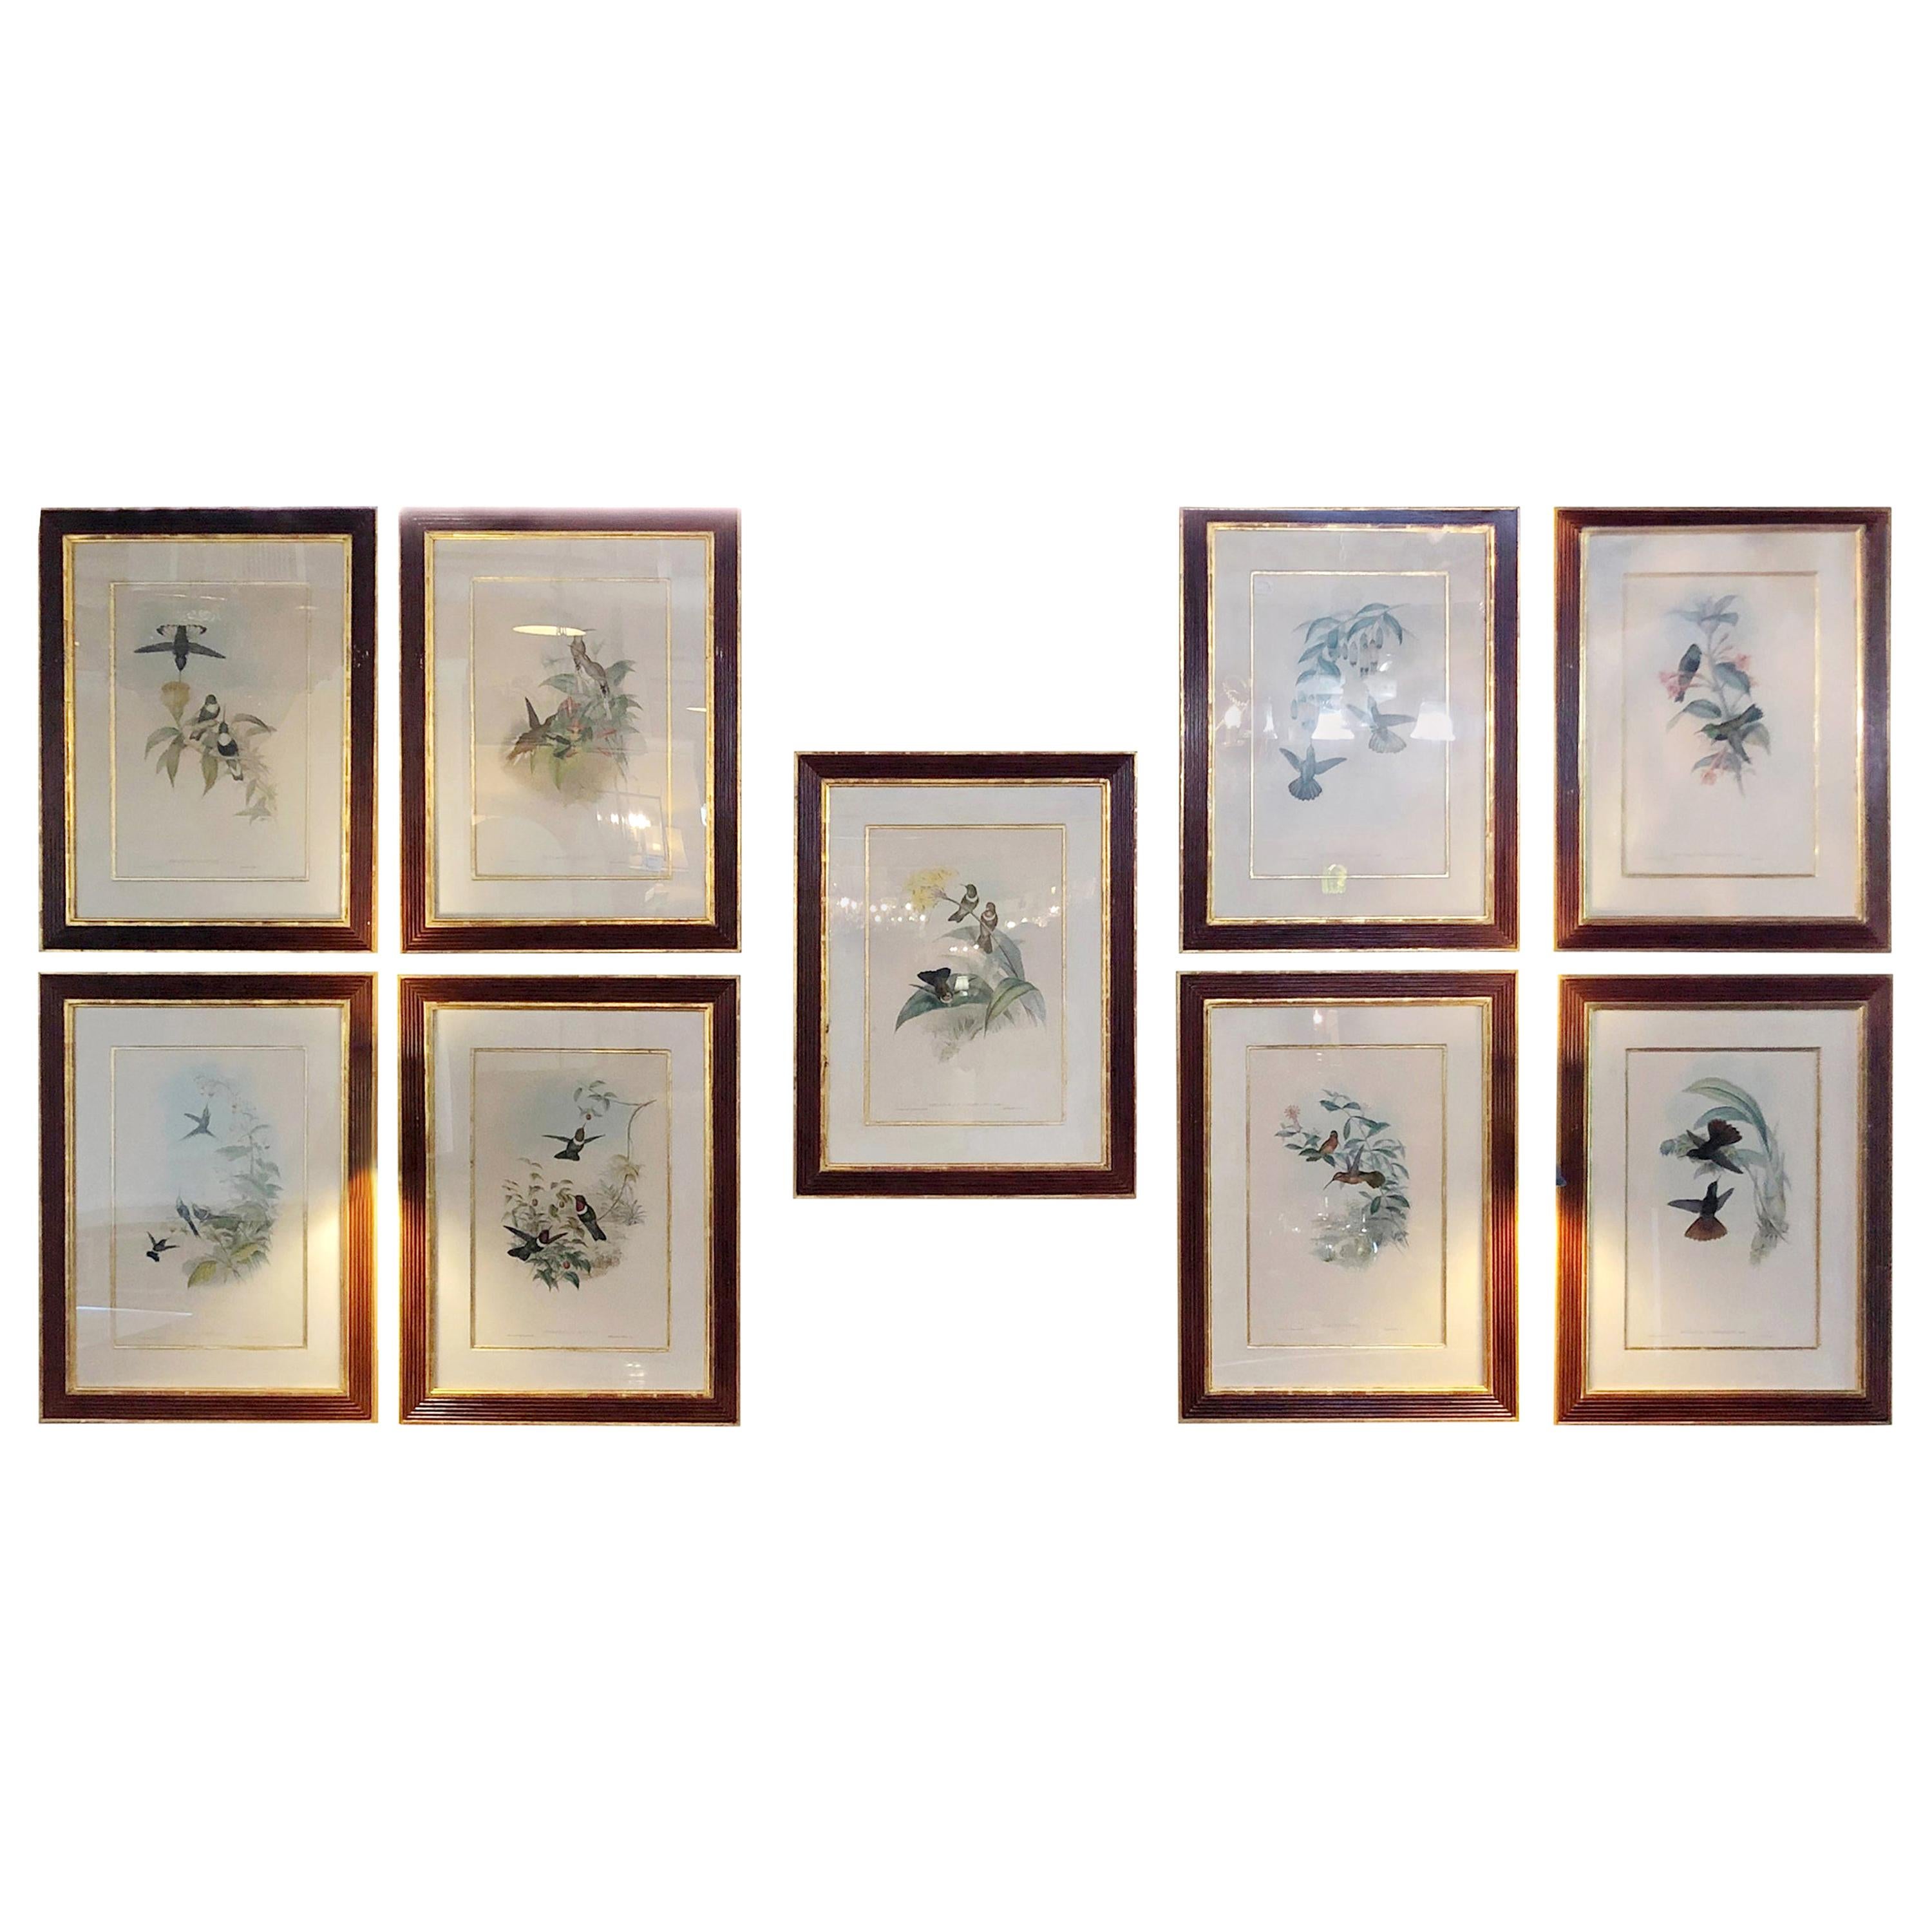 Group of Nine John Gould 19 Century Copperplate Hand Engravings Framed & Matted